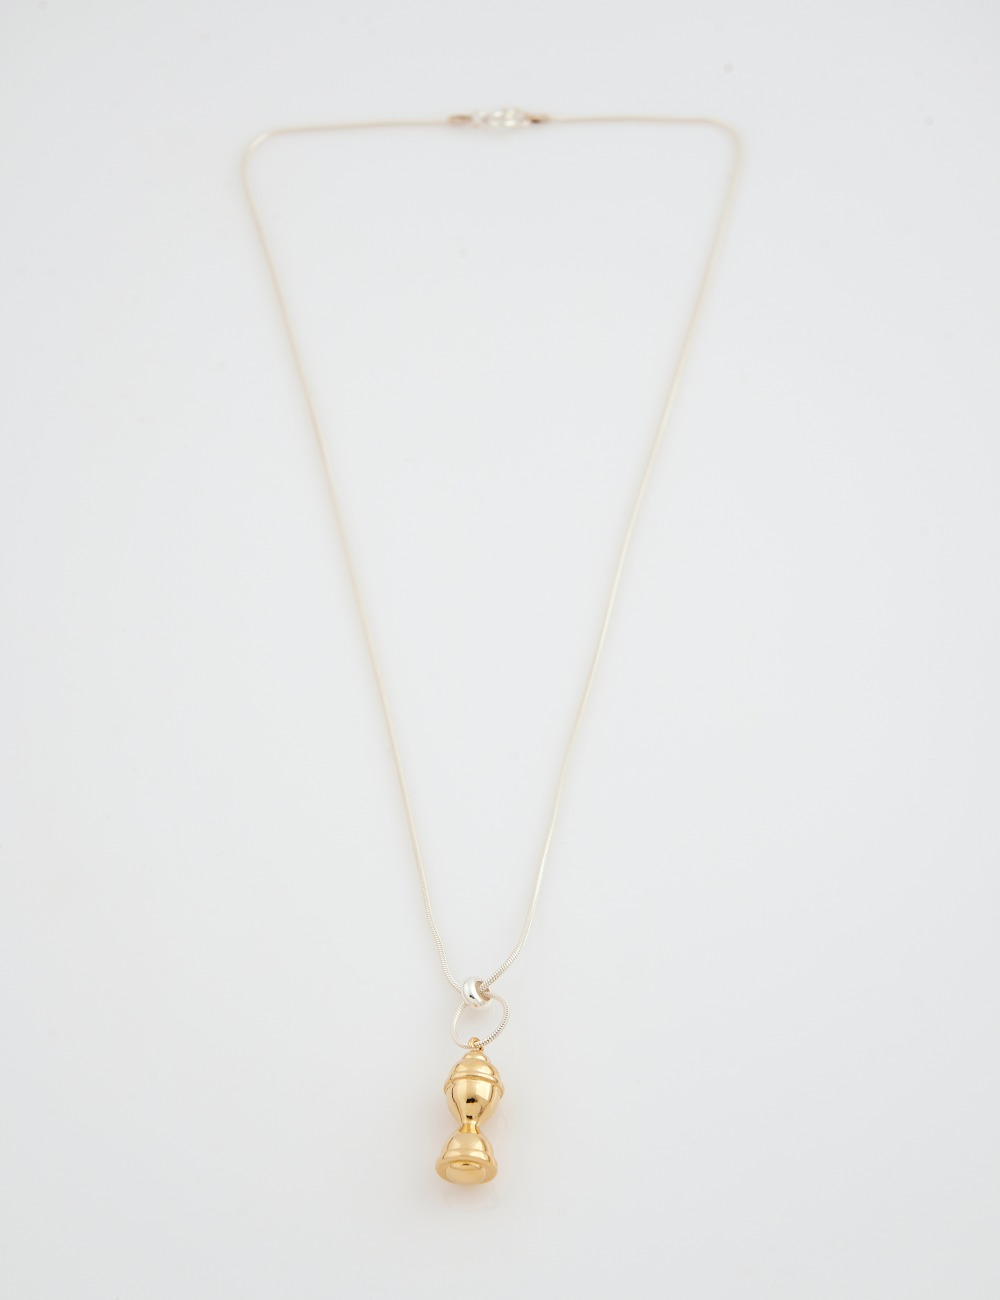 Sand glass Necklace (Gold)